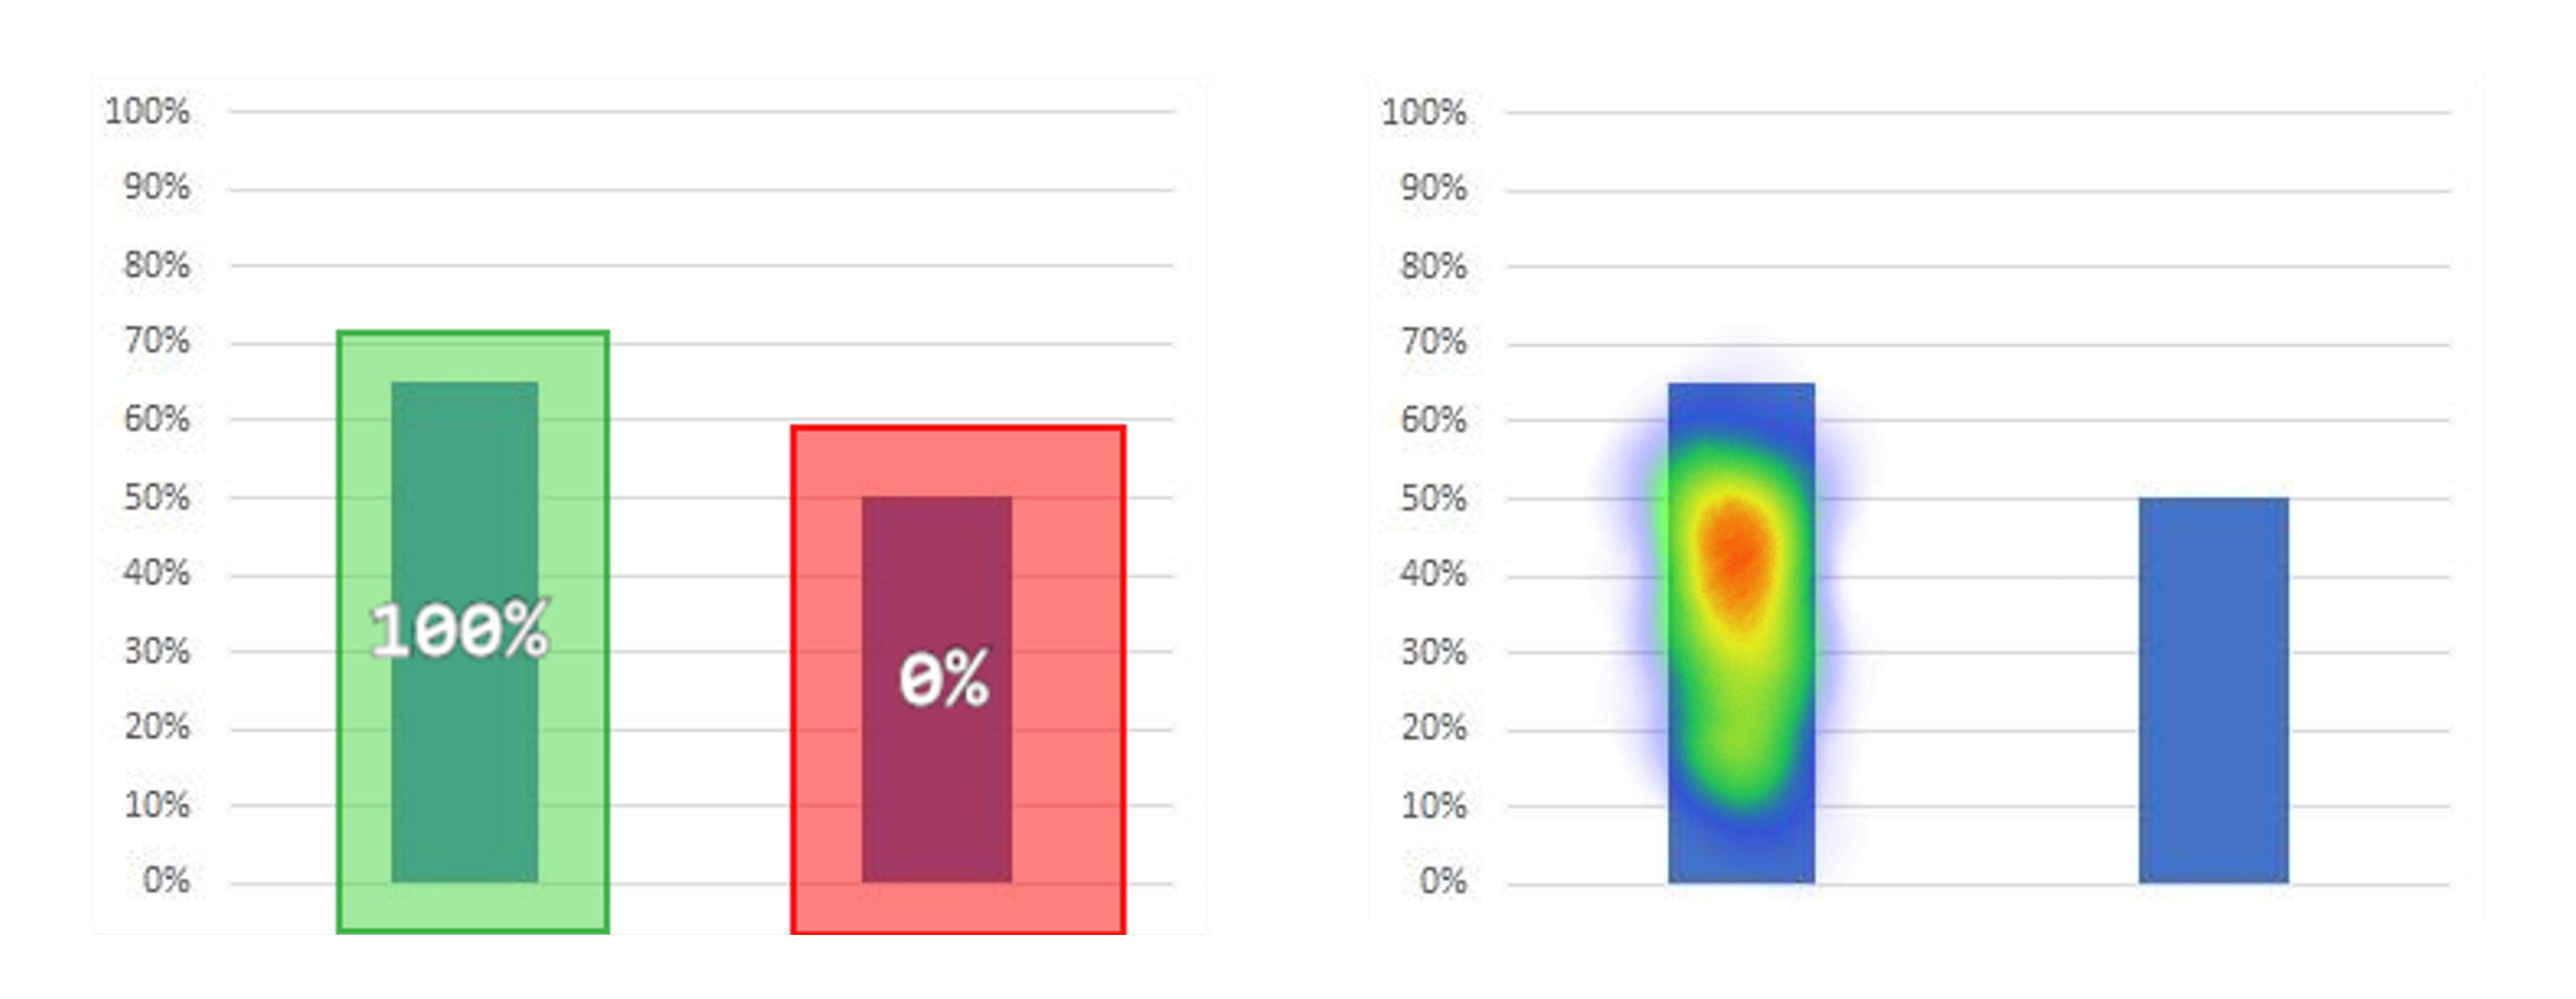 Output from the click test showing where participants clicked on each image in the correct region (left) and as a heatmap (right).